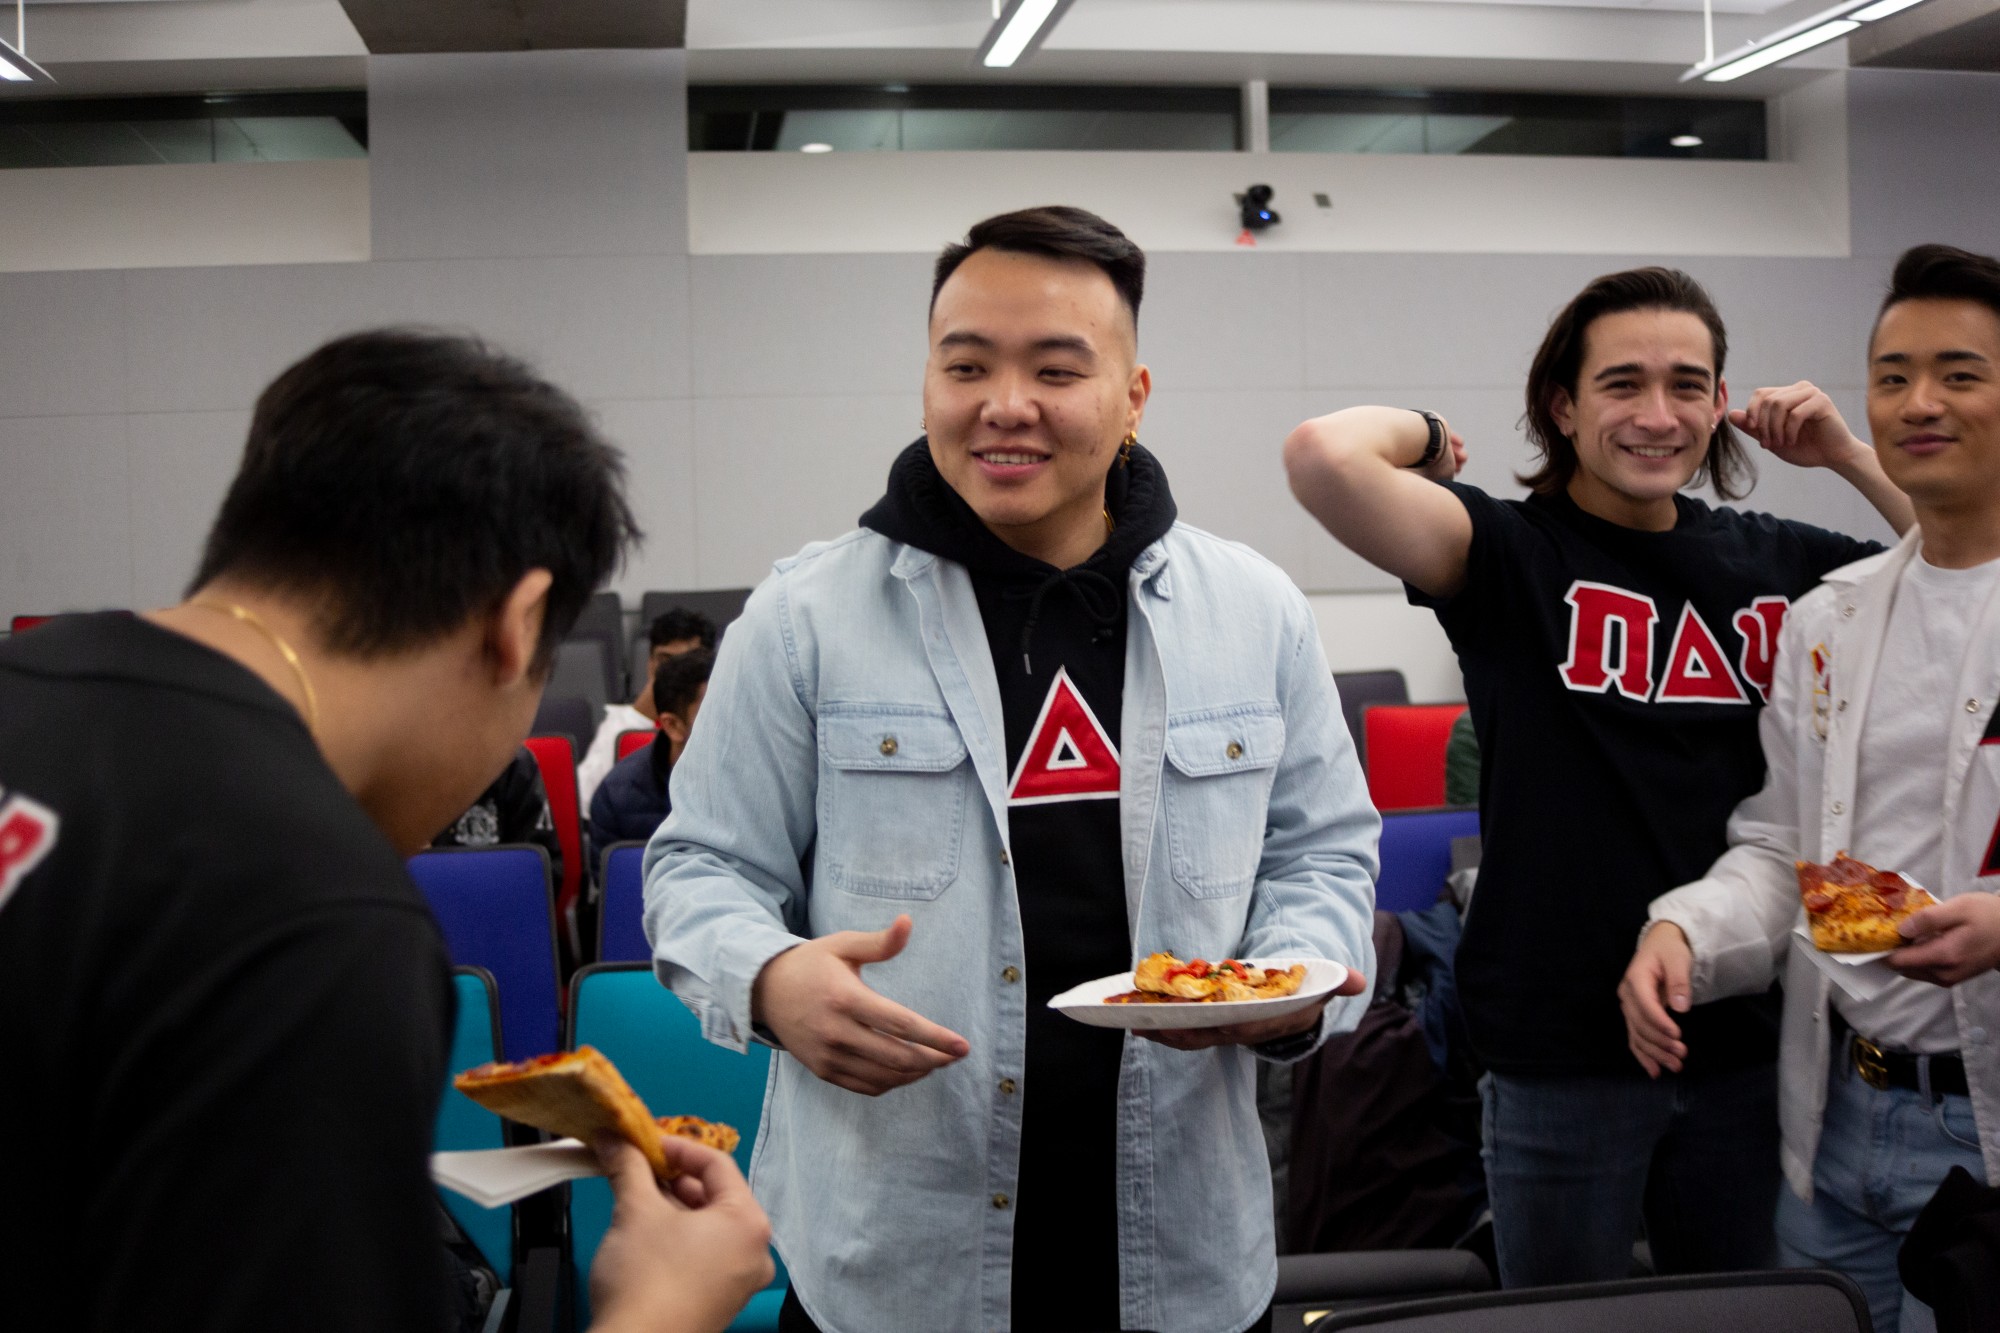  Members of the campus student greek life council meet in Bruininks Hall to discuss changes, plans for the future, and to welcome new members over pizza and music on Friday, Jan. 24, 2020. 